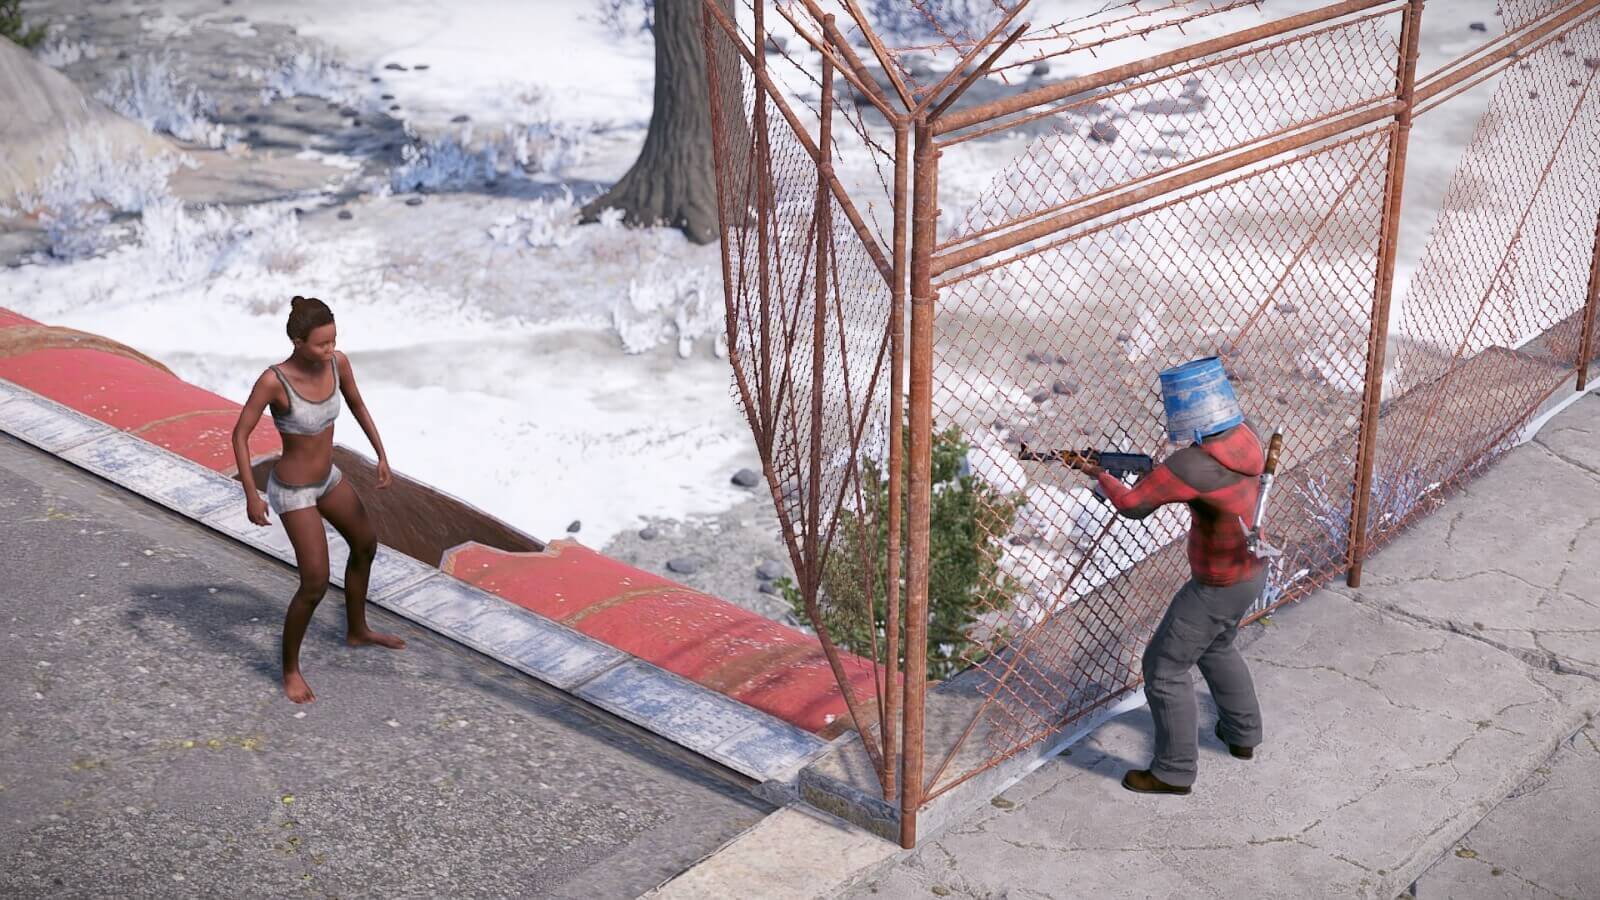 The fences do not offer any pvp protection against bullets even when doubled up in this situation.